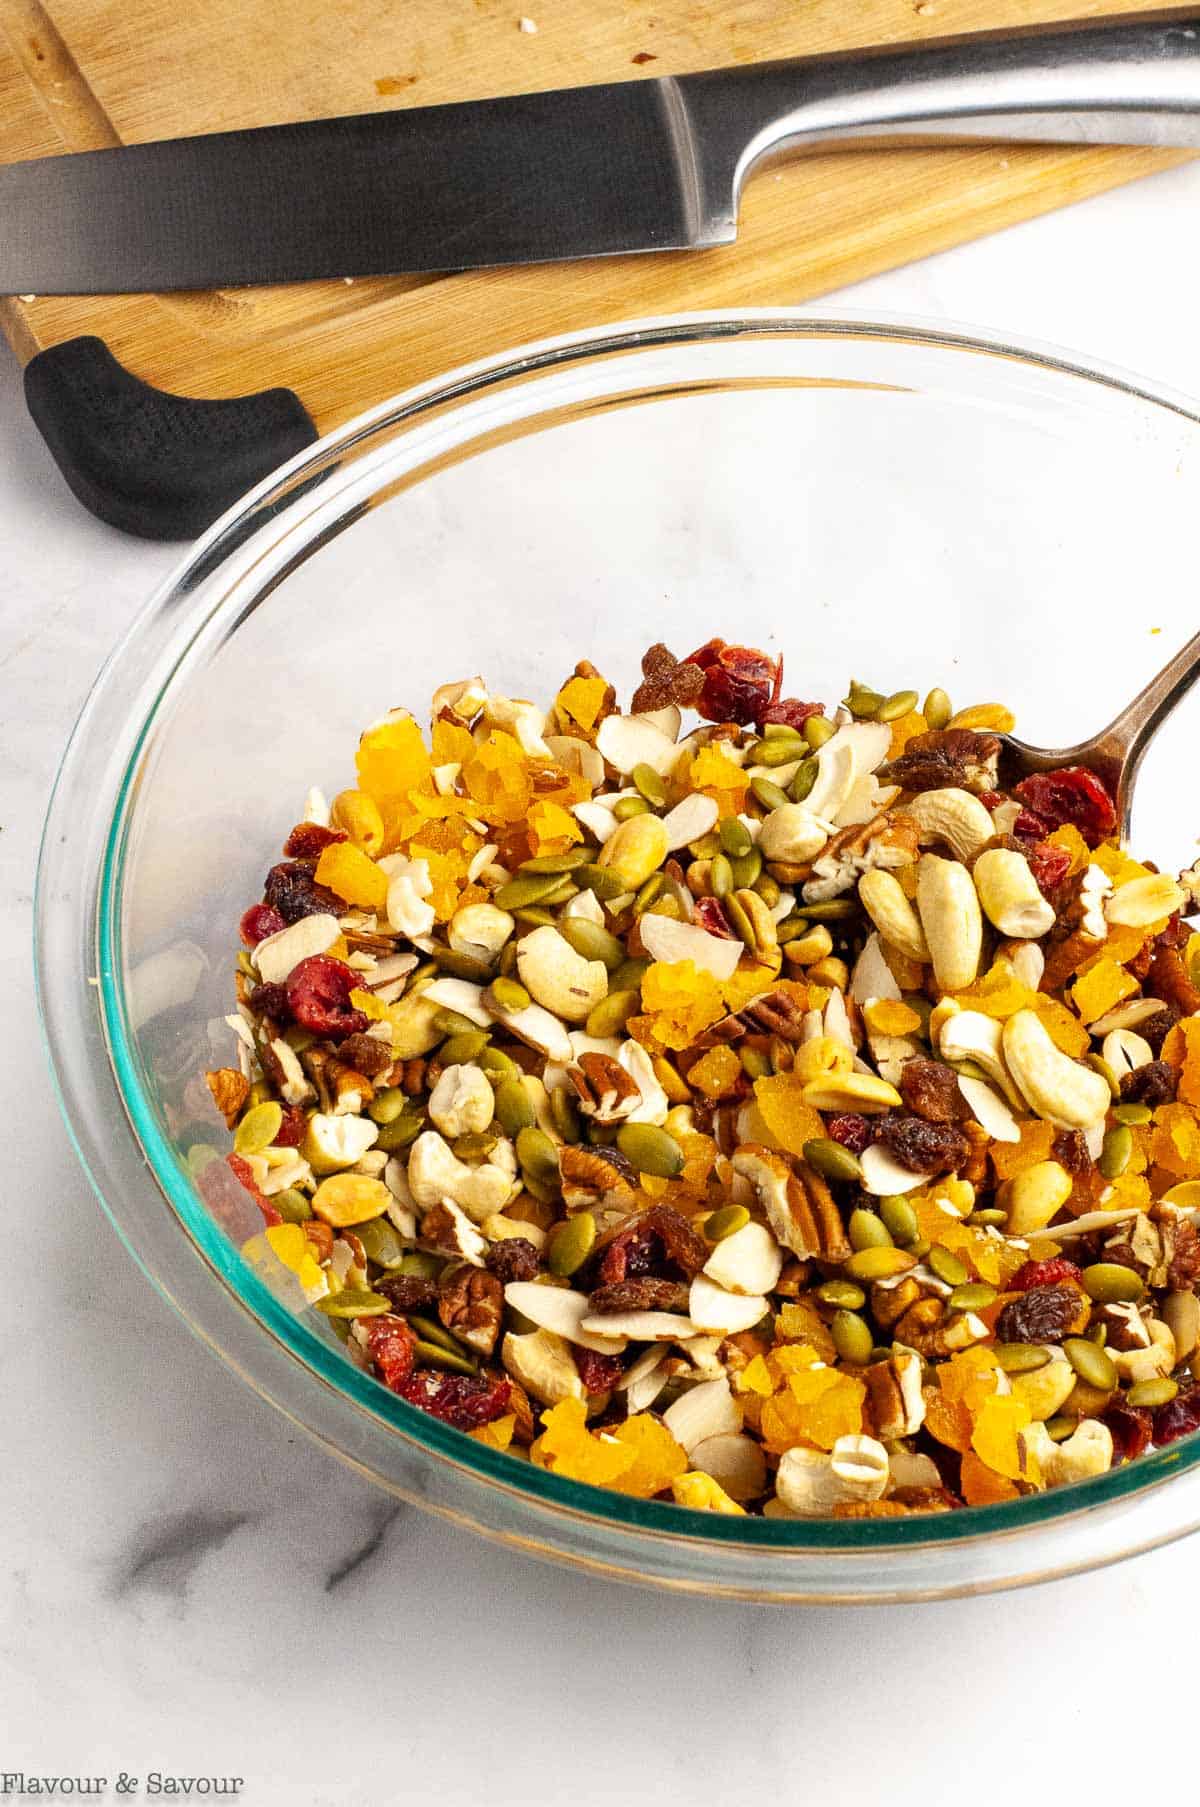 A bowl of nuts, seeds and dried fruit to make trail mix.